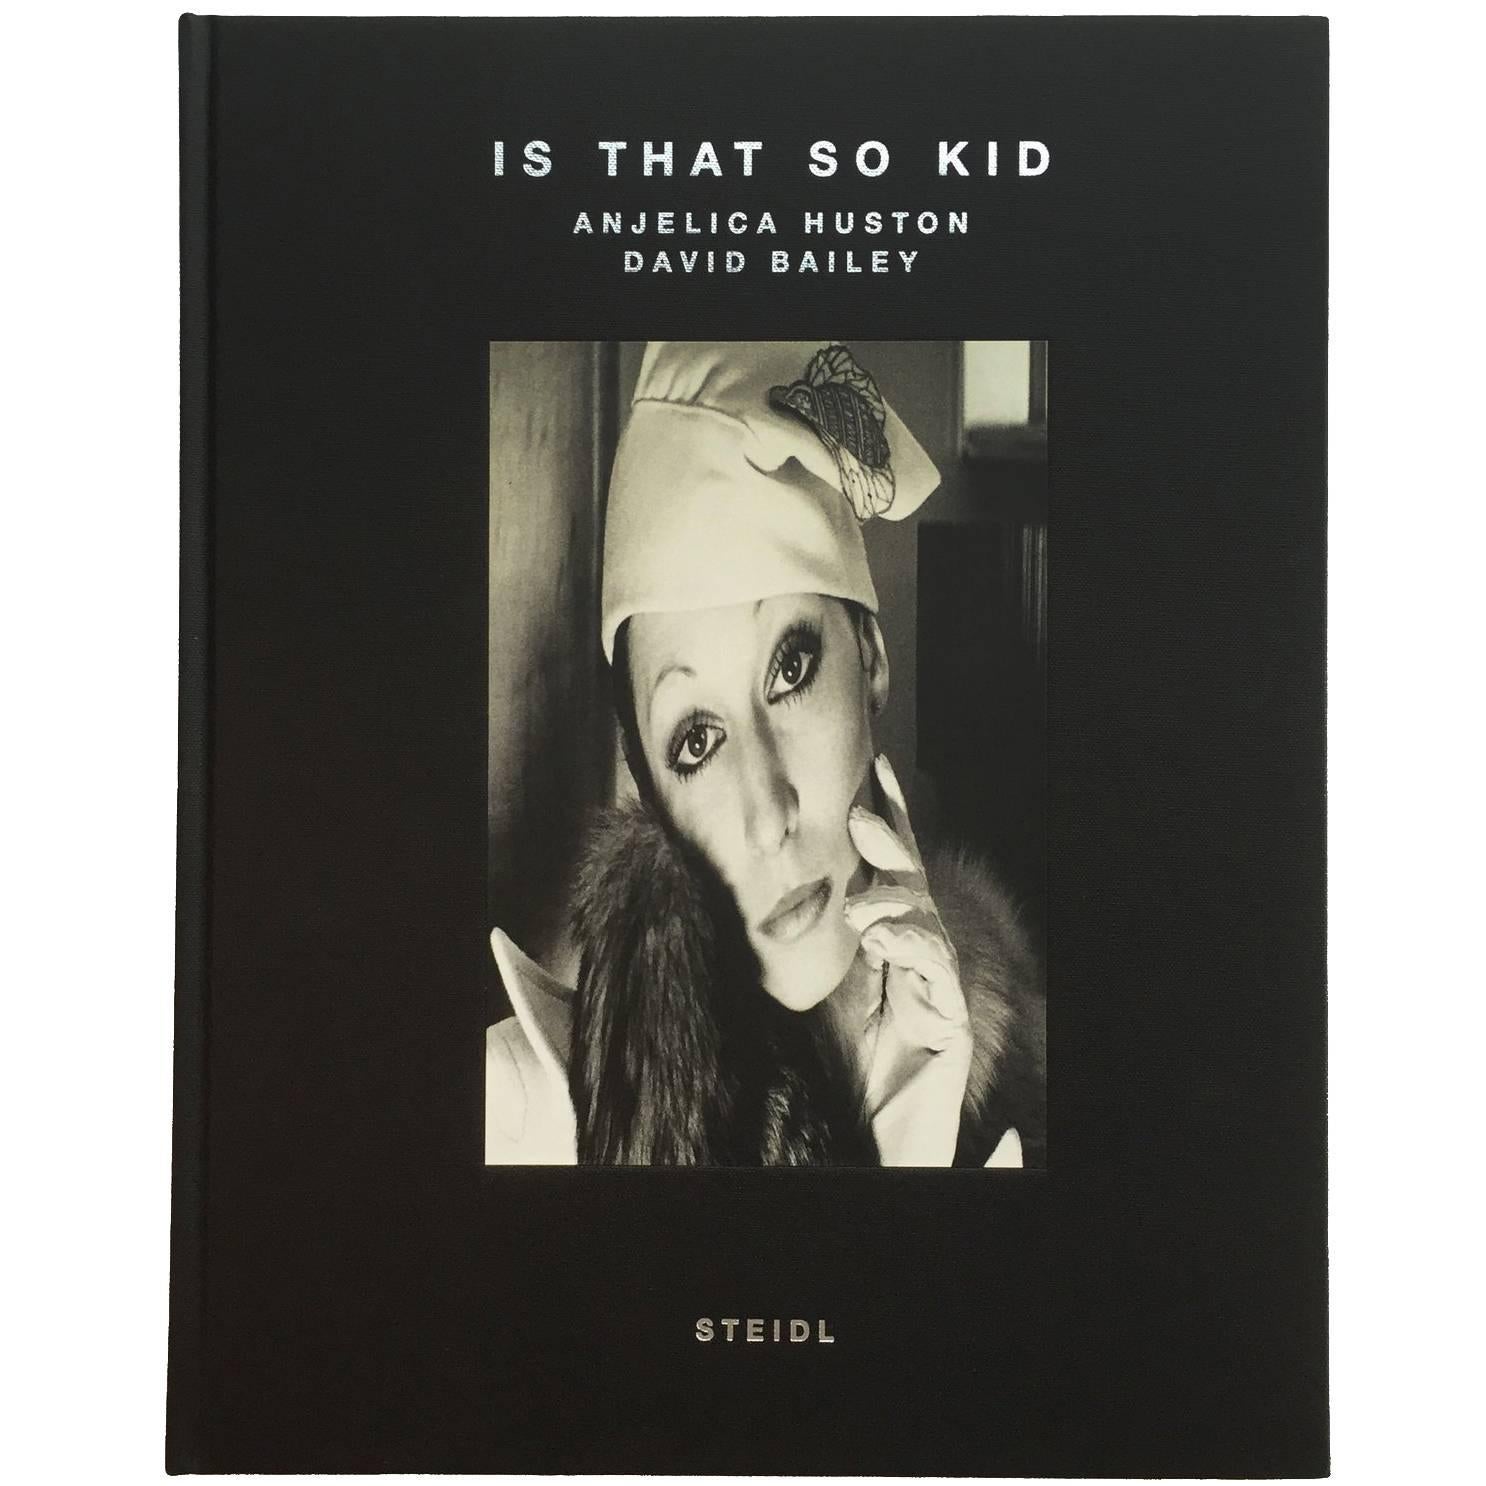 David Bailey & Anjelica Huston ‘Is That So Kid’ Book 'Signed'